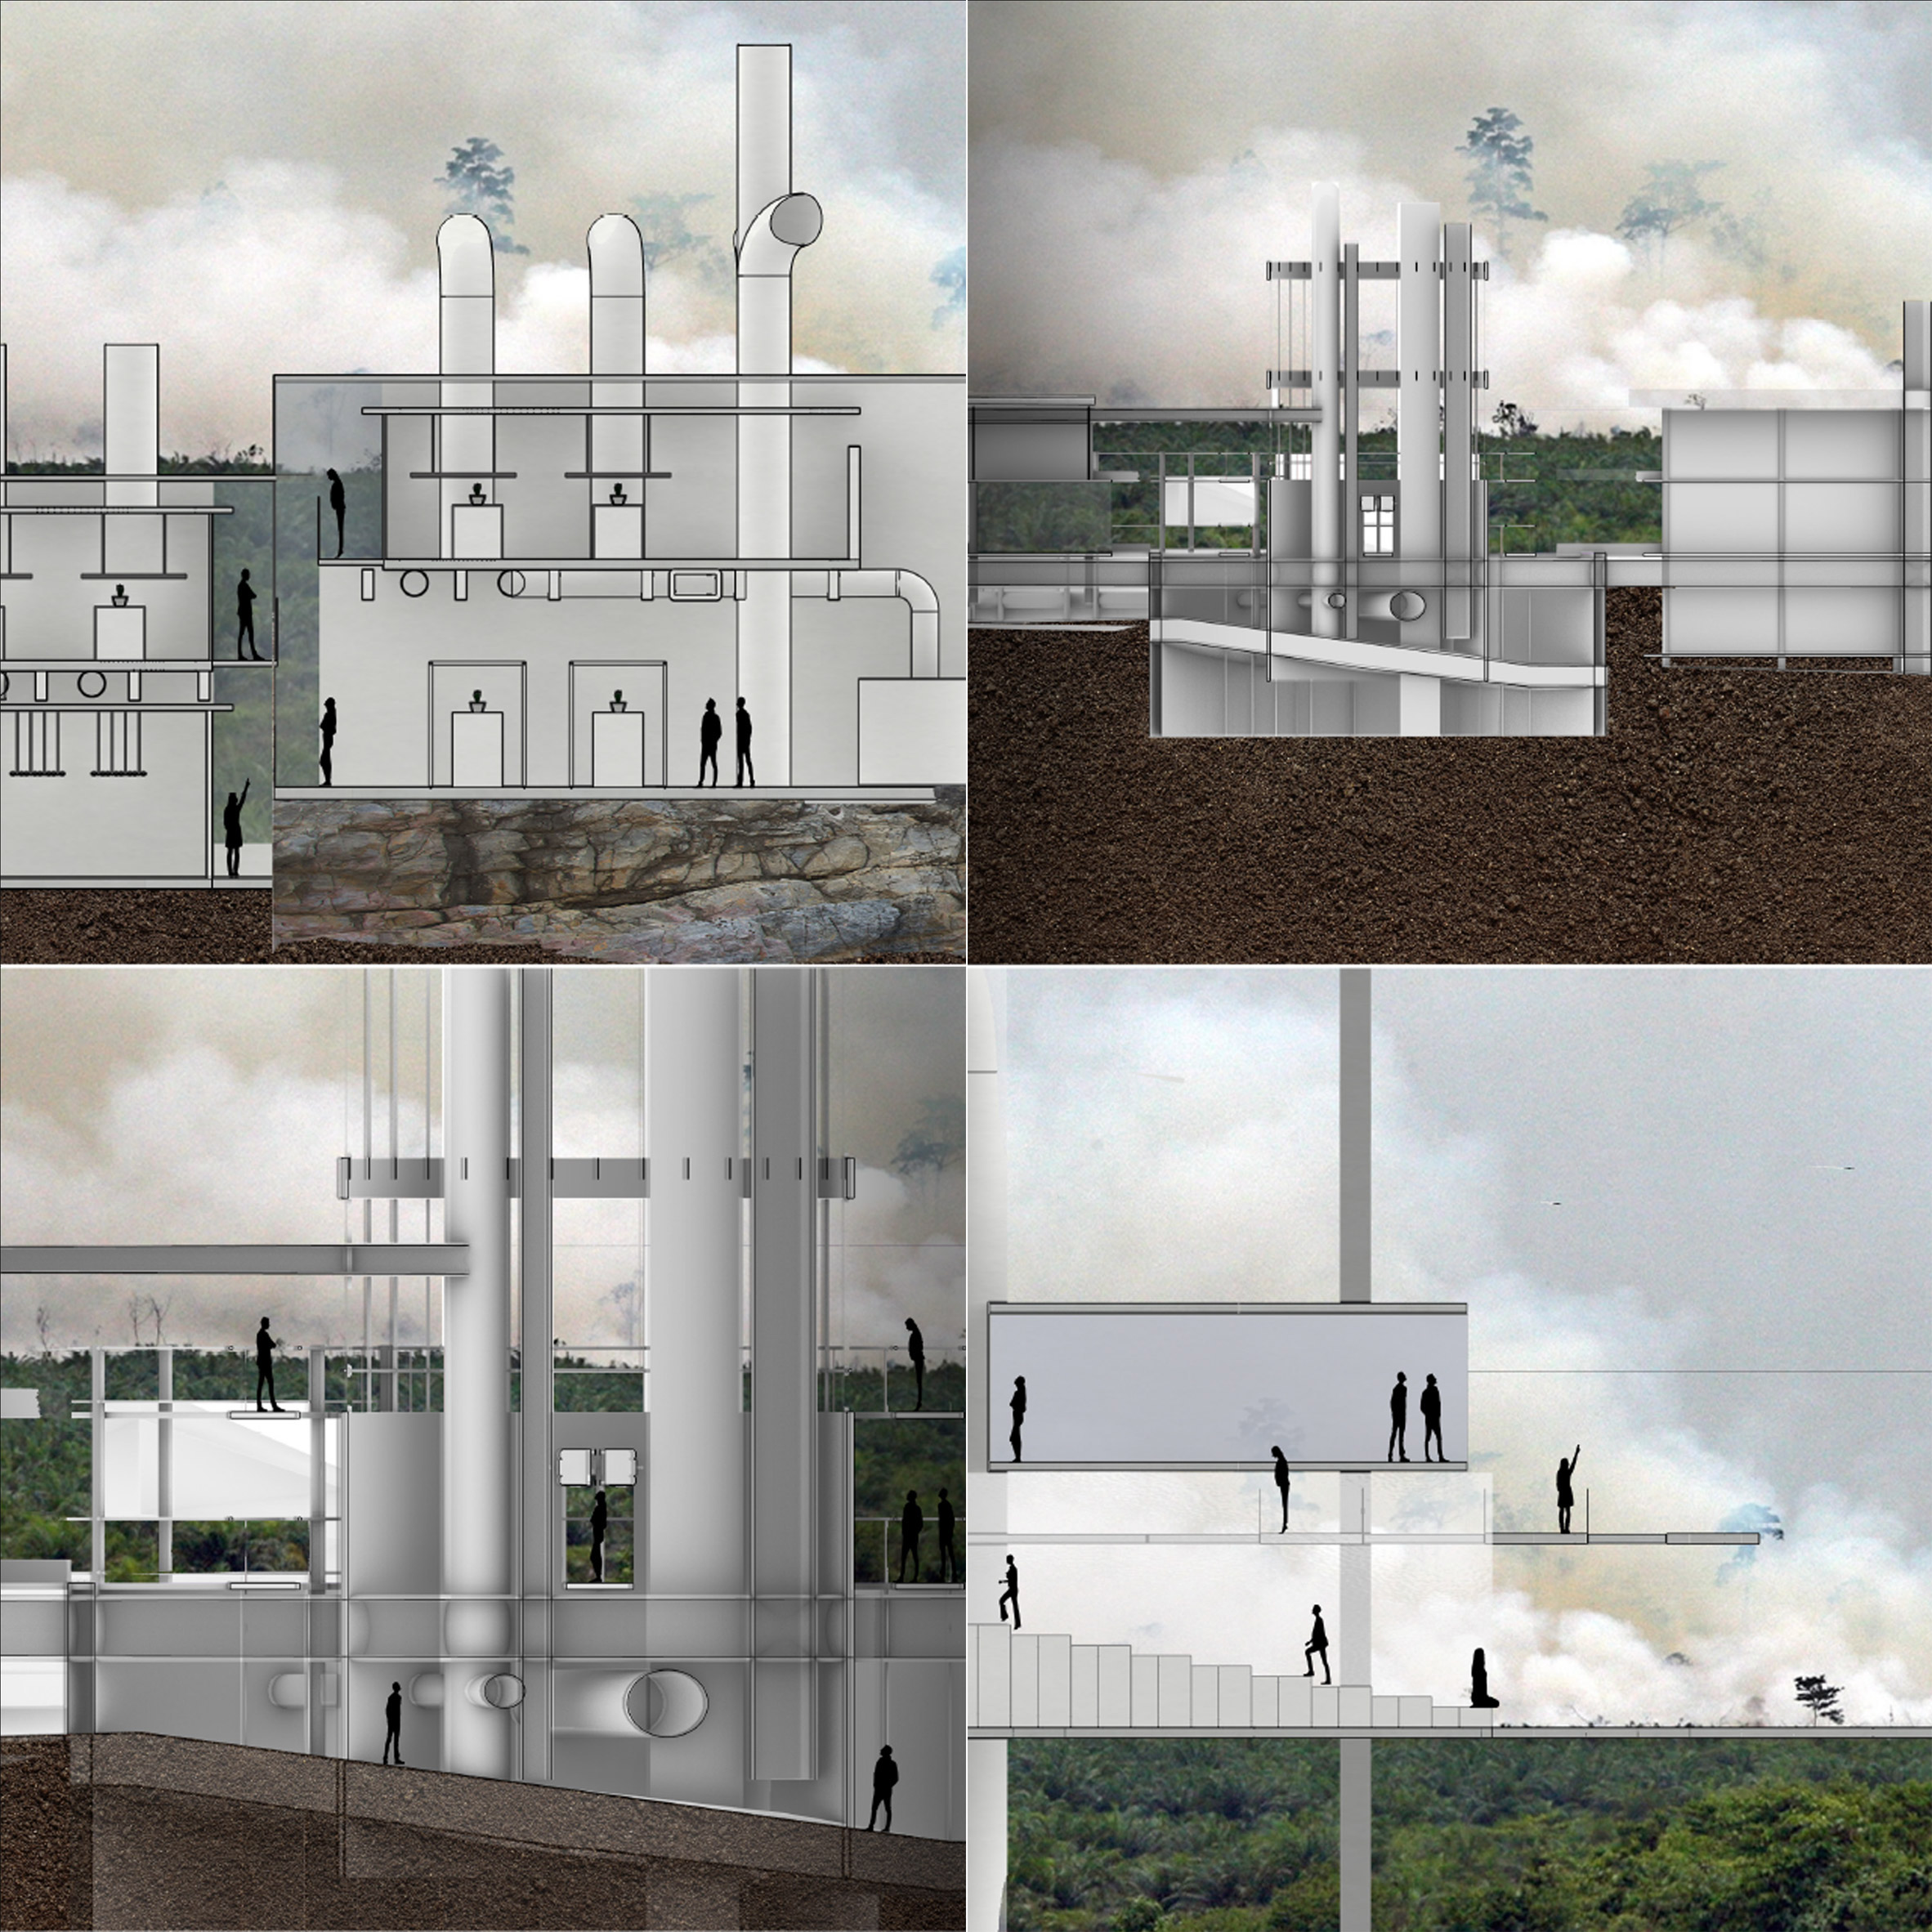 Architectural drawings and rendering of forest preservation building